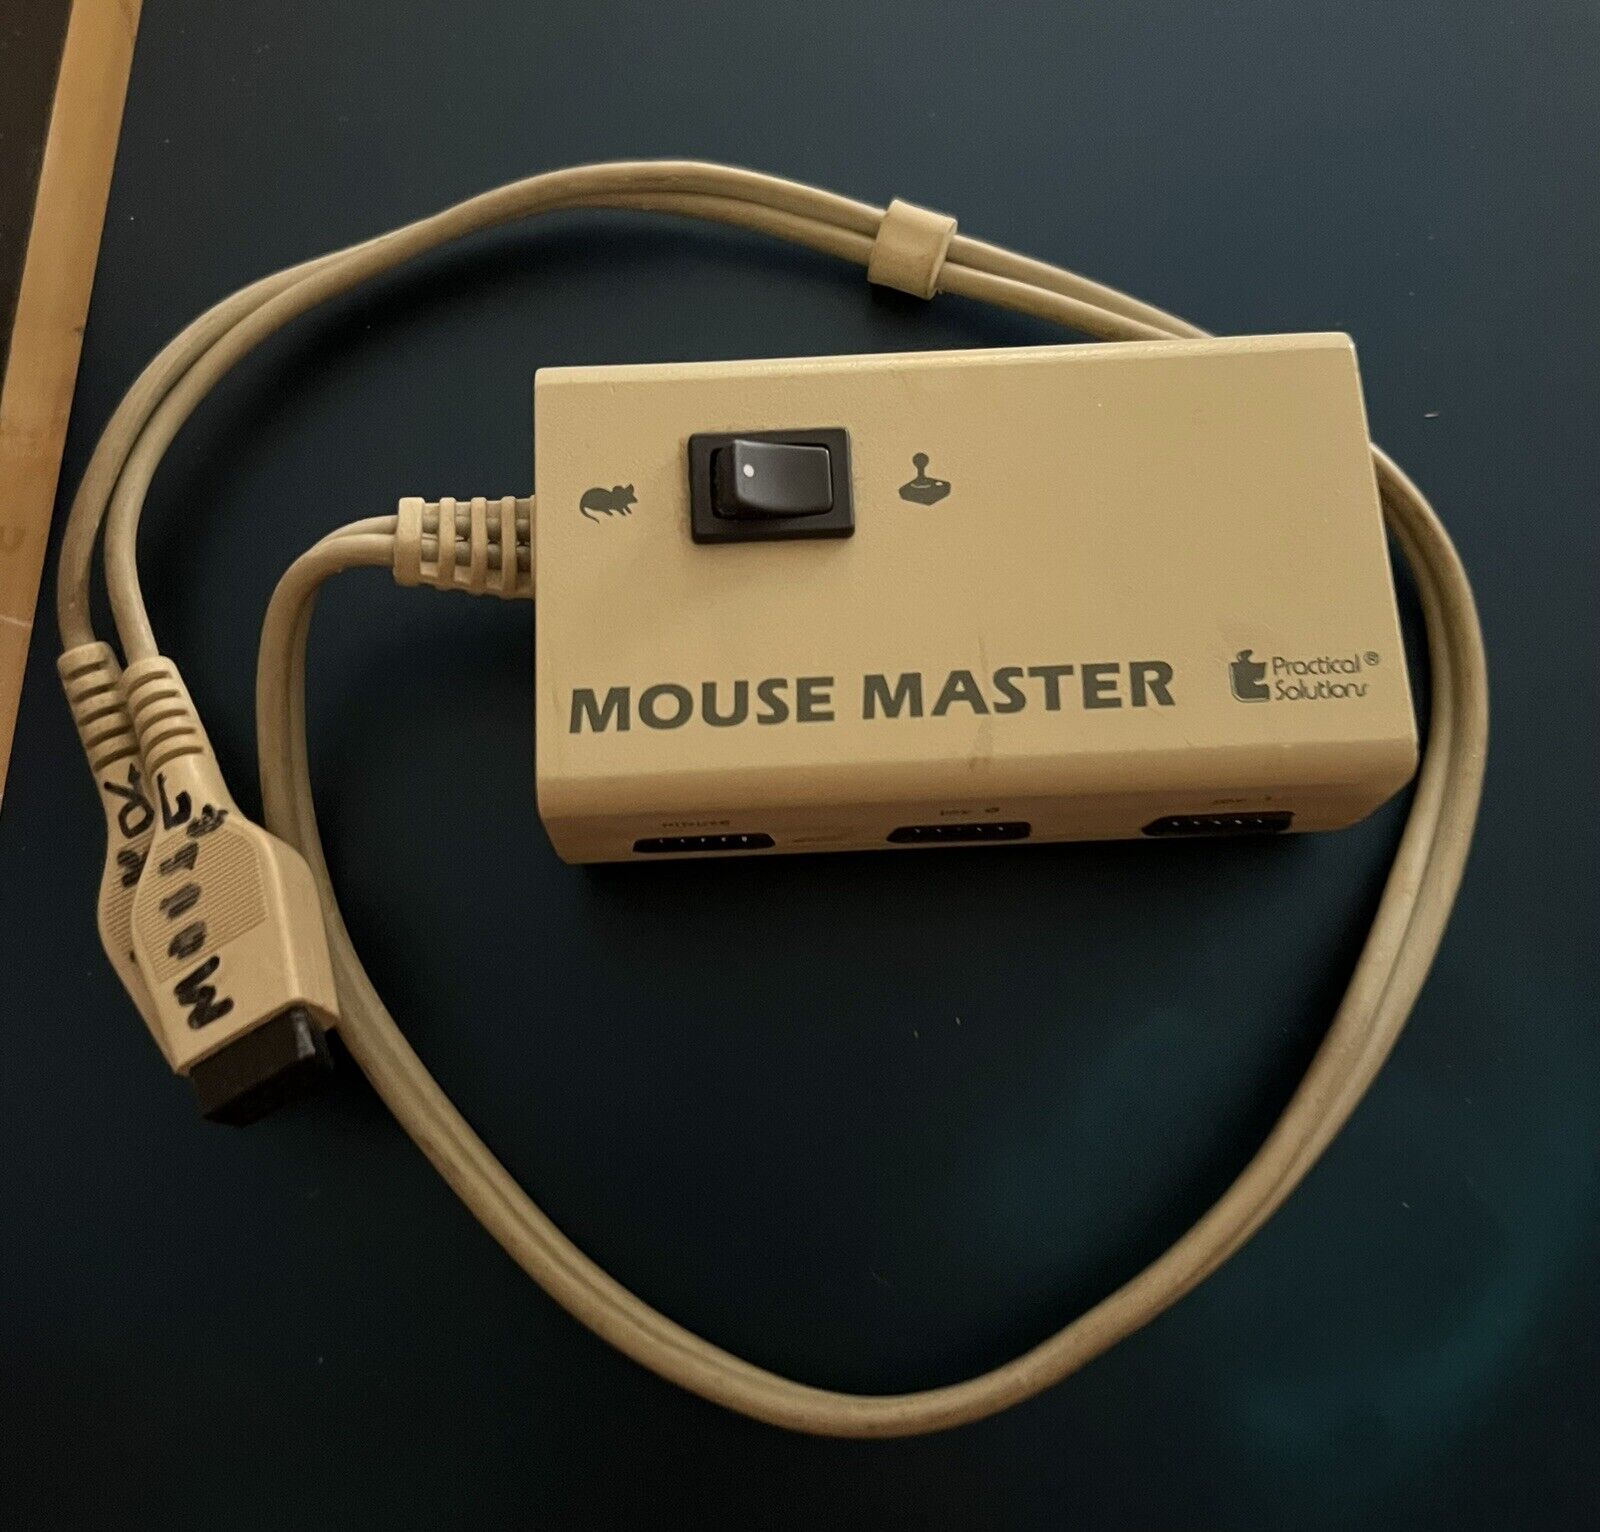 Mouse Master For Amiga Computers. Switch Between Joystick And Mouse. Vintage.